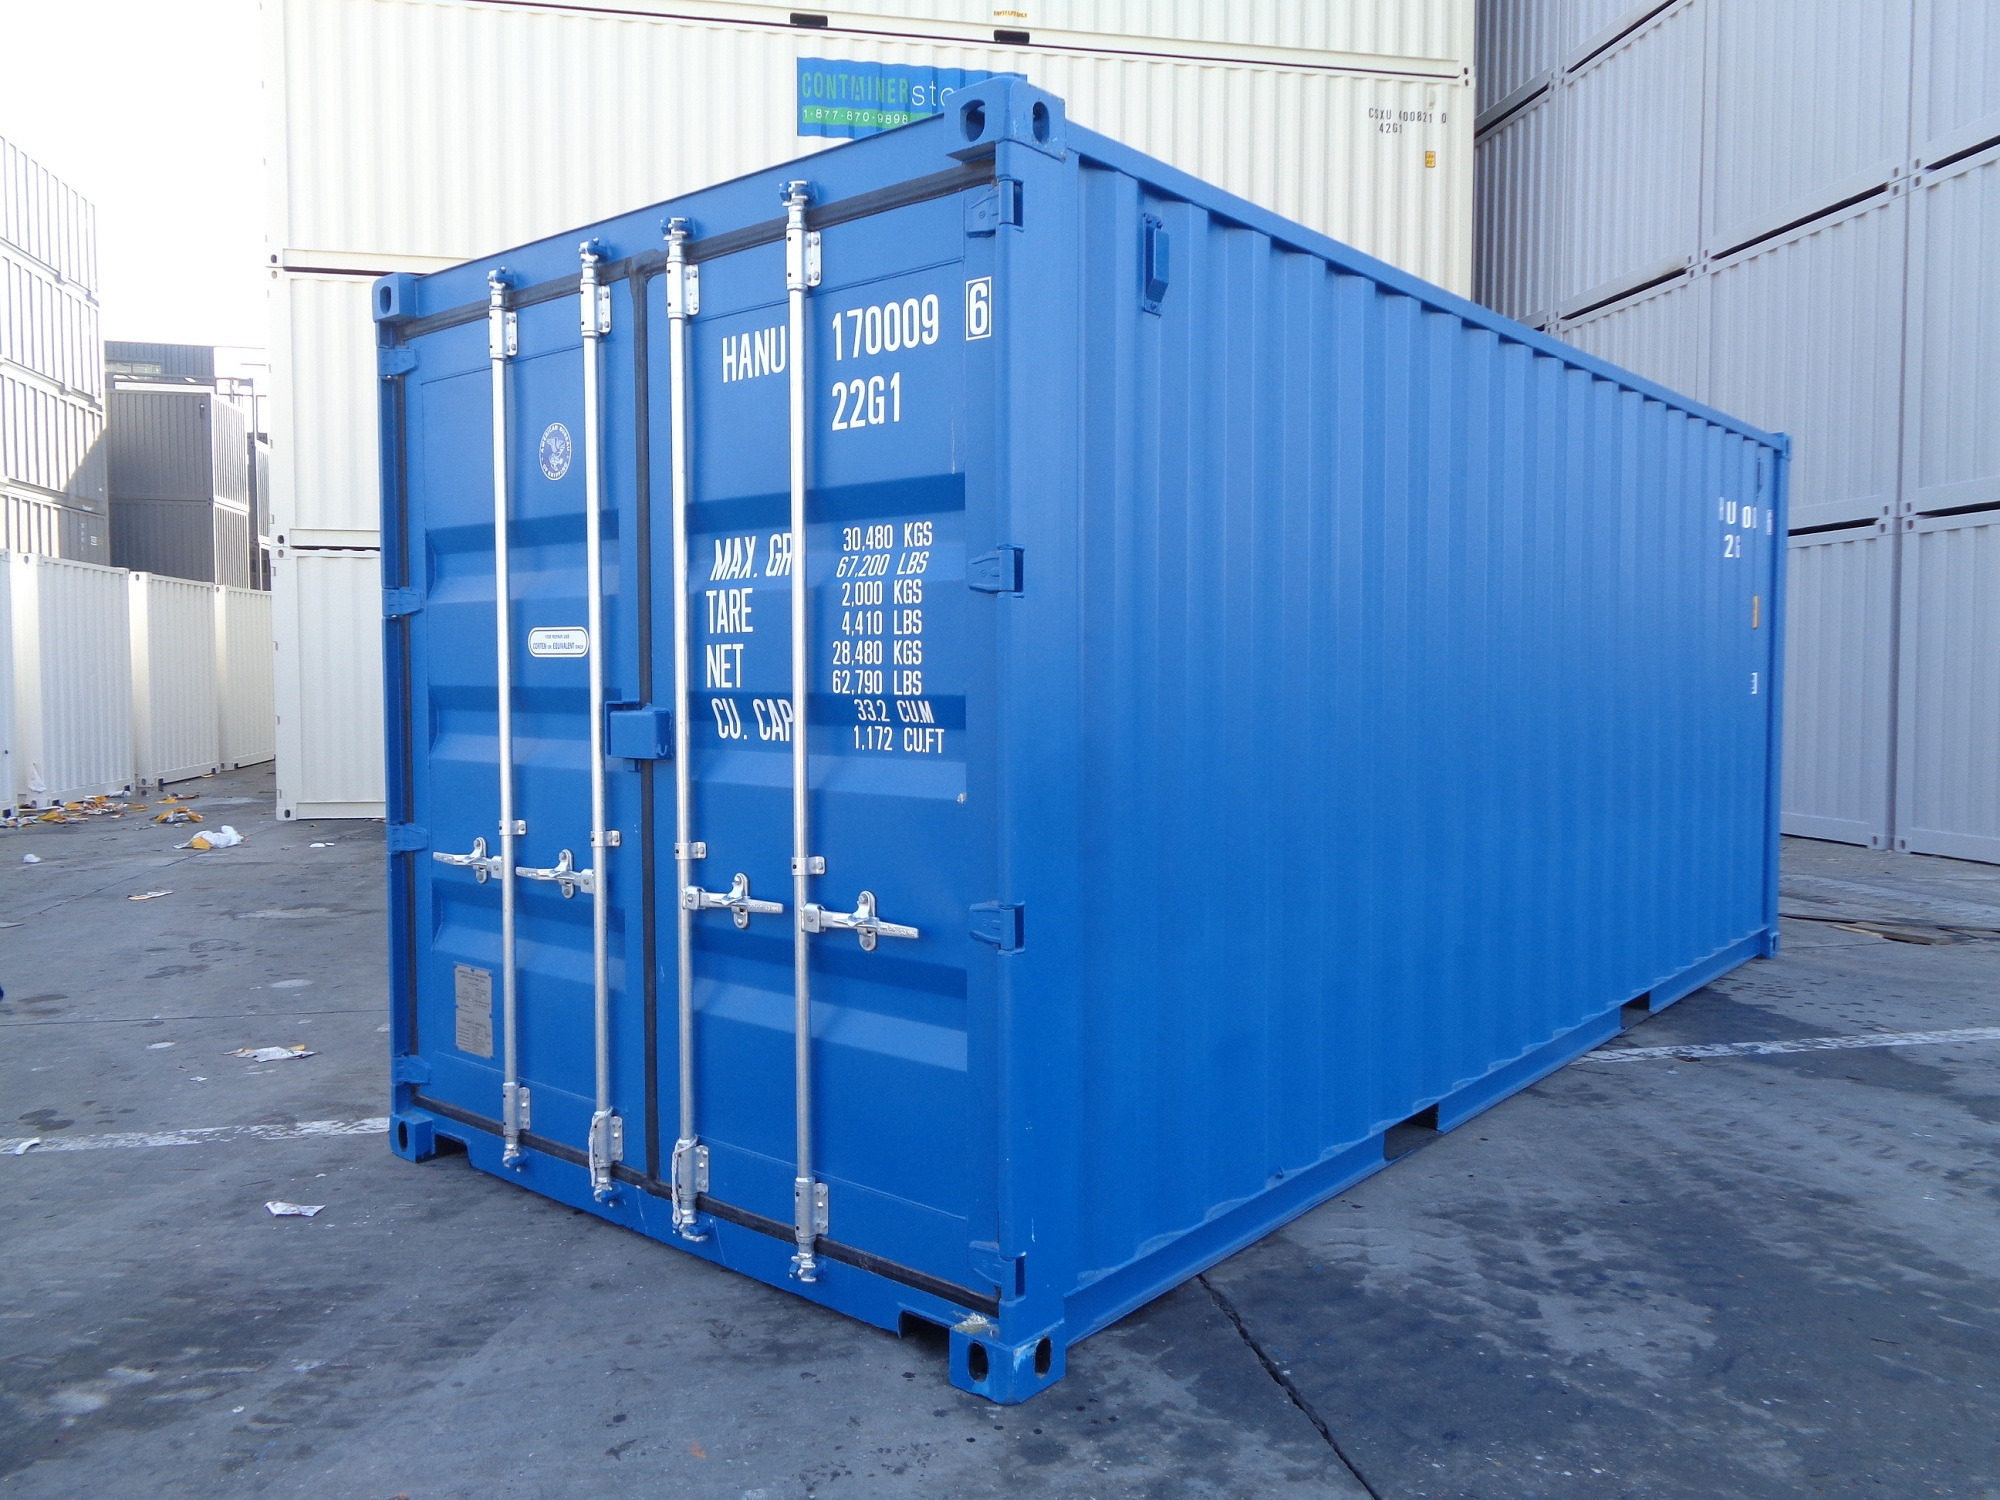 HCT Hansa Container Trading GmbH undefined: слика 4